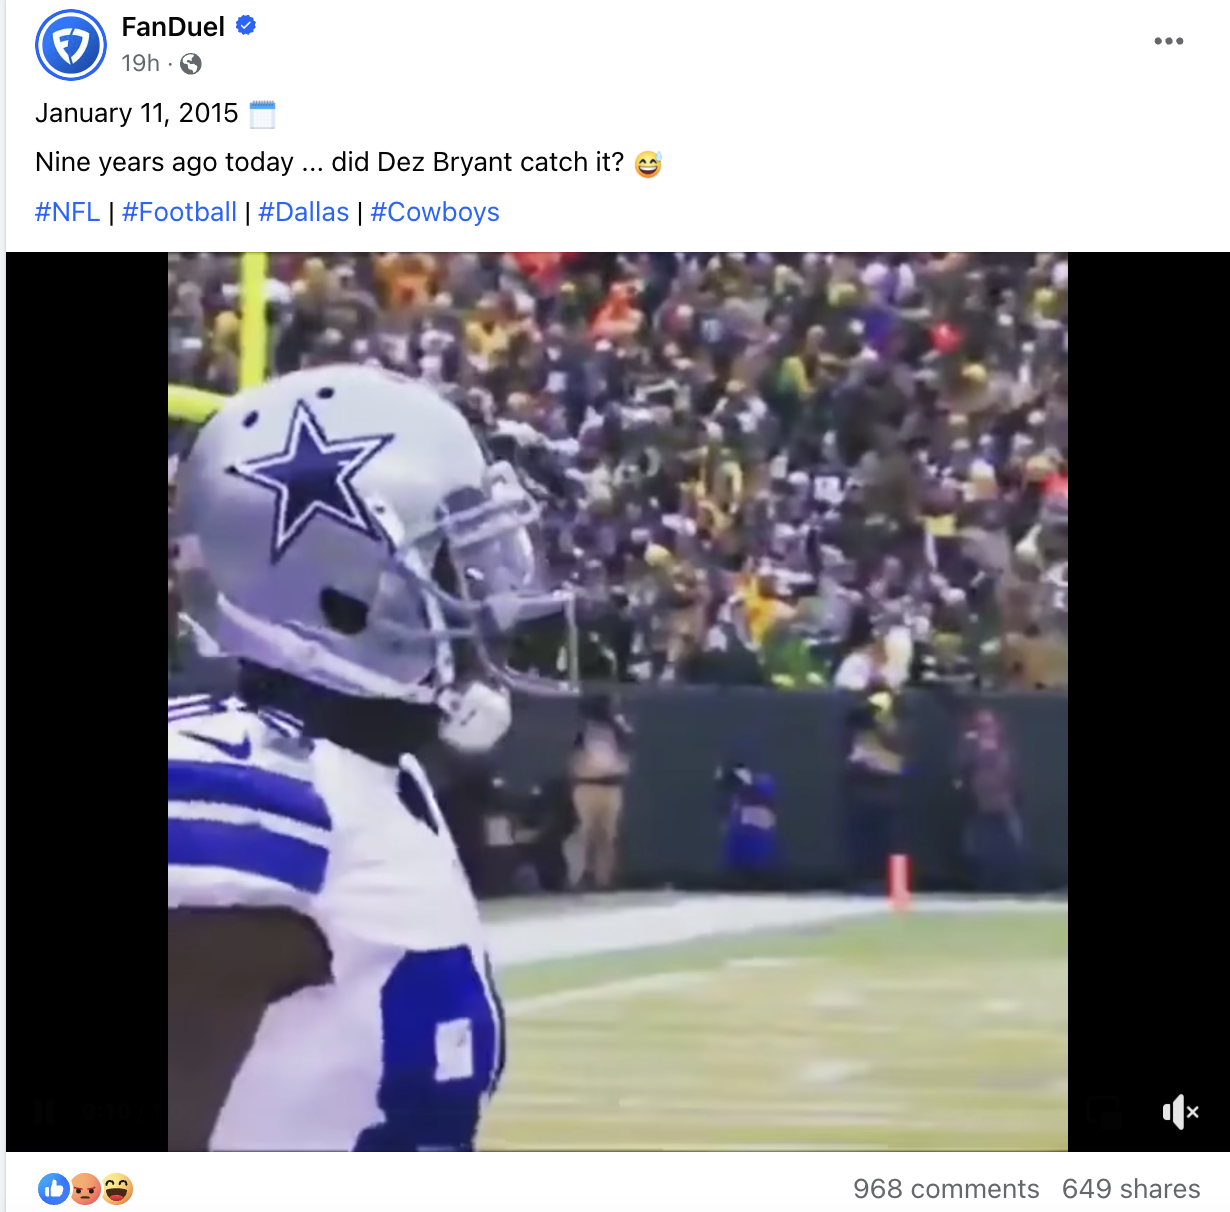 Facebook post from FanDuel containing the #nfl hashtag and showing a Dallas Cowboys player trying to catch the ball